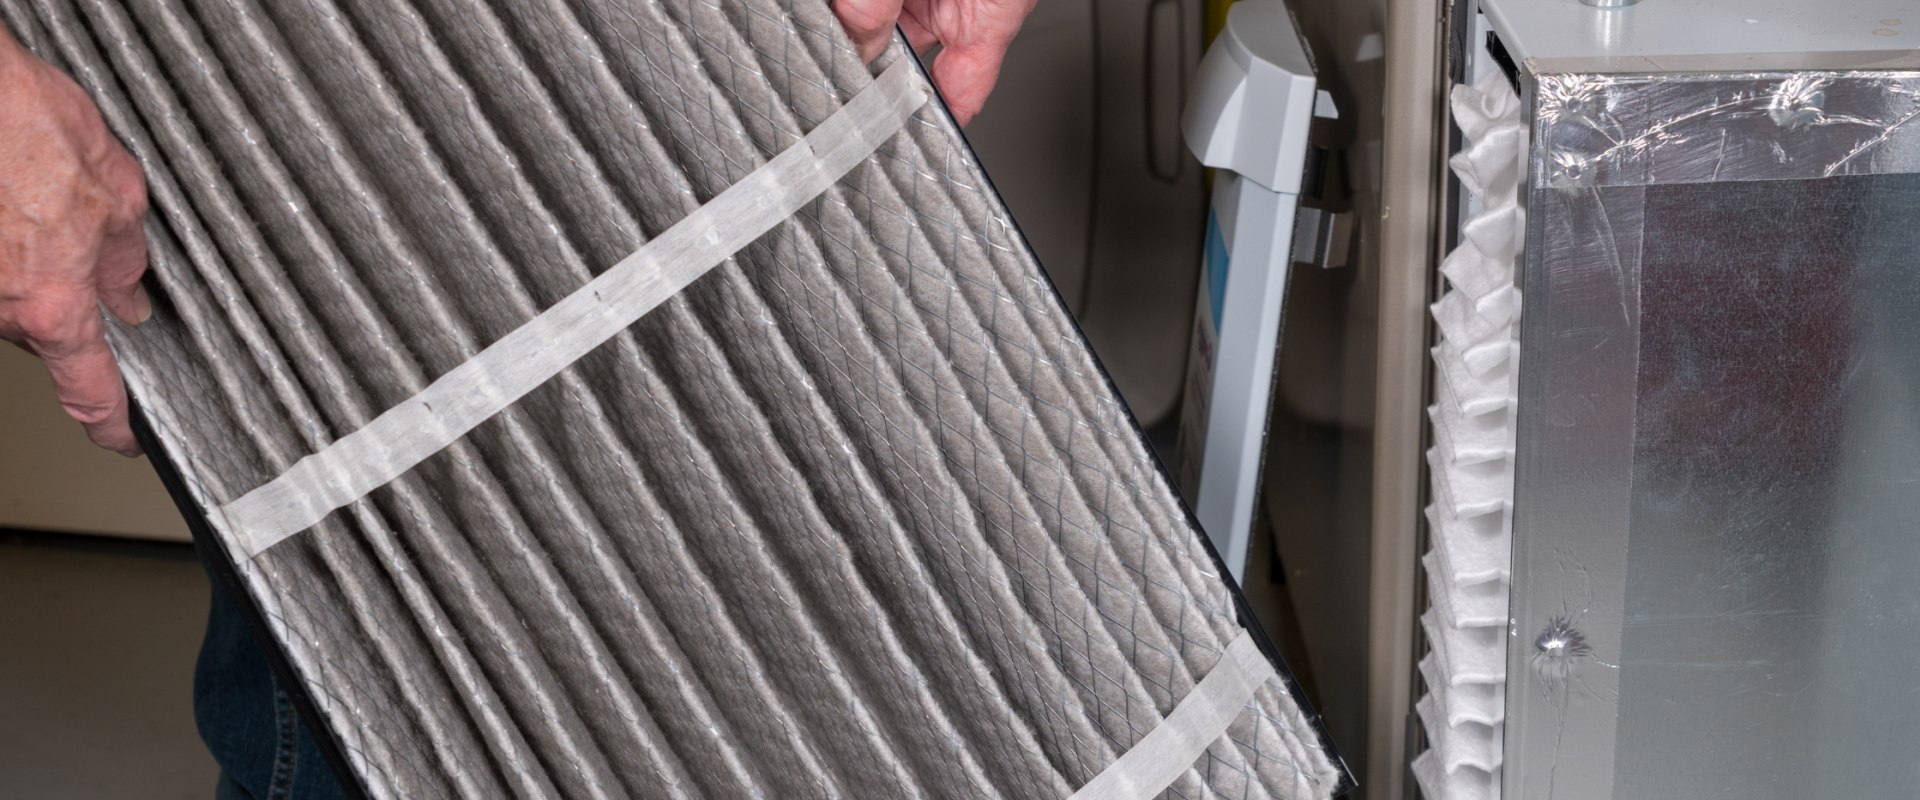 What are the Dimensions of a Standard Furnace Filter Size?